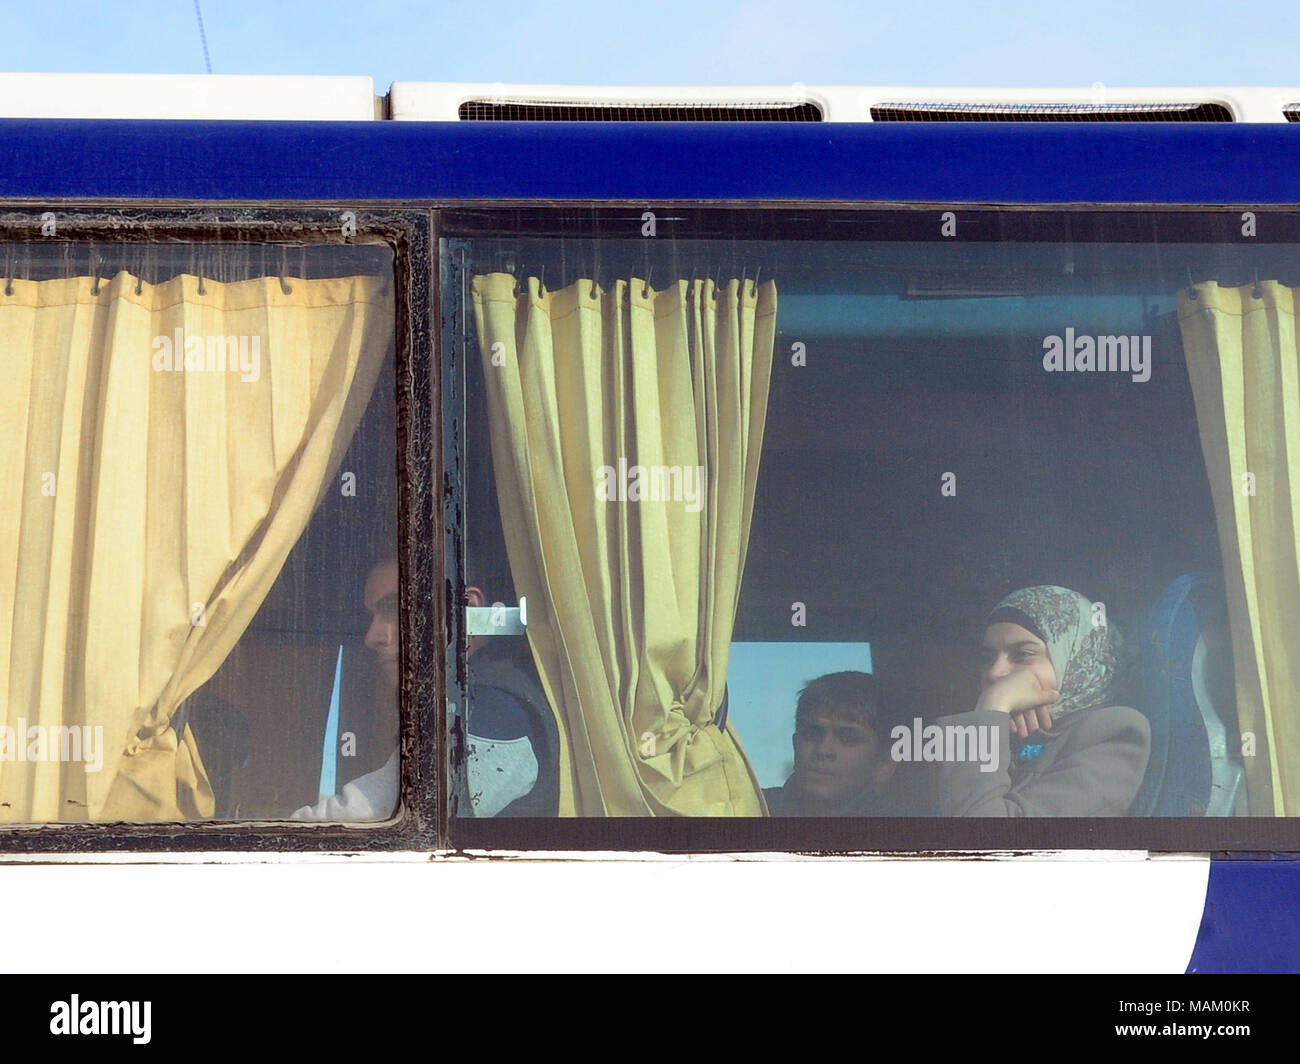 Damascus, Syria. 2nd Apr, 2018. Family members of Islam Army are seen on a bus departing the district of Douma in Eastern Ghouta through a crossing point in Wafideen area, northeast of Damascus, Syria, on April 2, 2018. Some 1,146 militants of the Islam Army and their families departed the Douma district in Eastern Ghouta toward the rebel-held Jarablus city in the north, marking the first batch of this rebel group to evacuate their main stronghold near Damascus, according to the state news agency SANA. Credit: Ammar Safarjalani/Xinhua/Alamy Live News Stock Photo